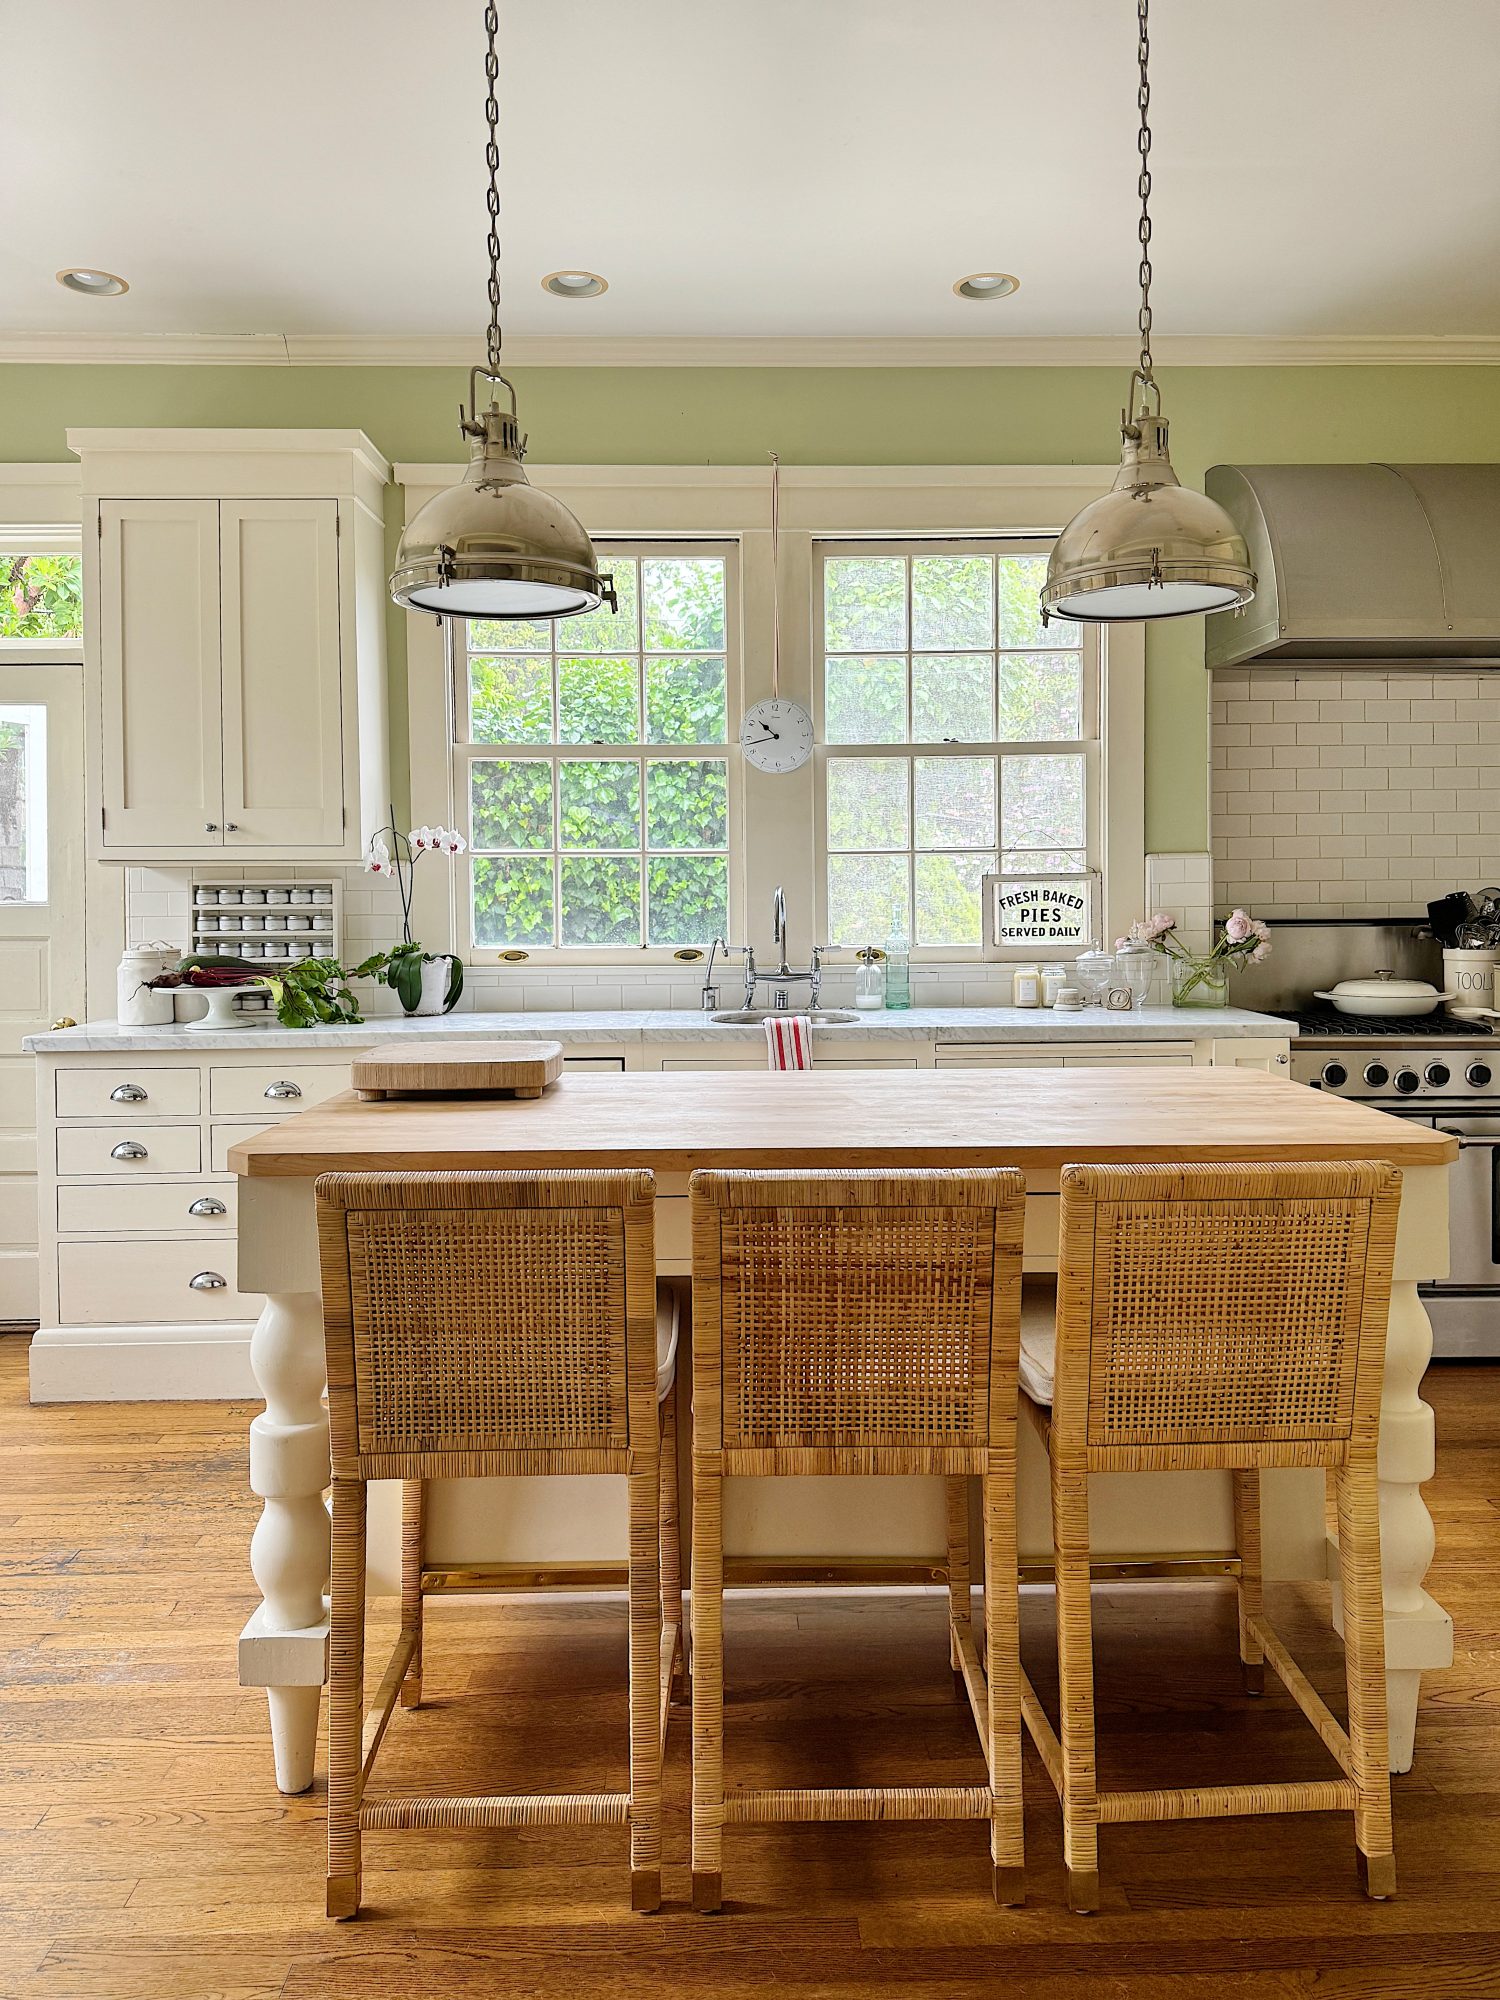 A bright kitchen with white cabinets, a wooden island, and three woven chairs. Two pendant lights hang above the island, and a large window provides natural light. The floor is wooden.